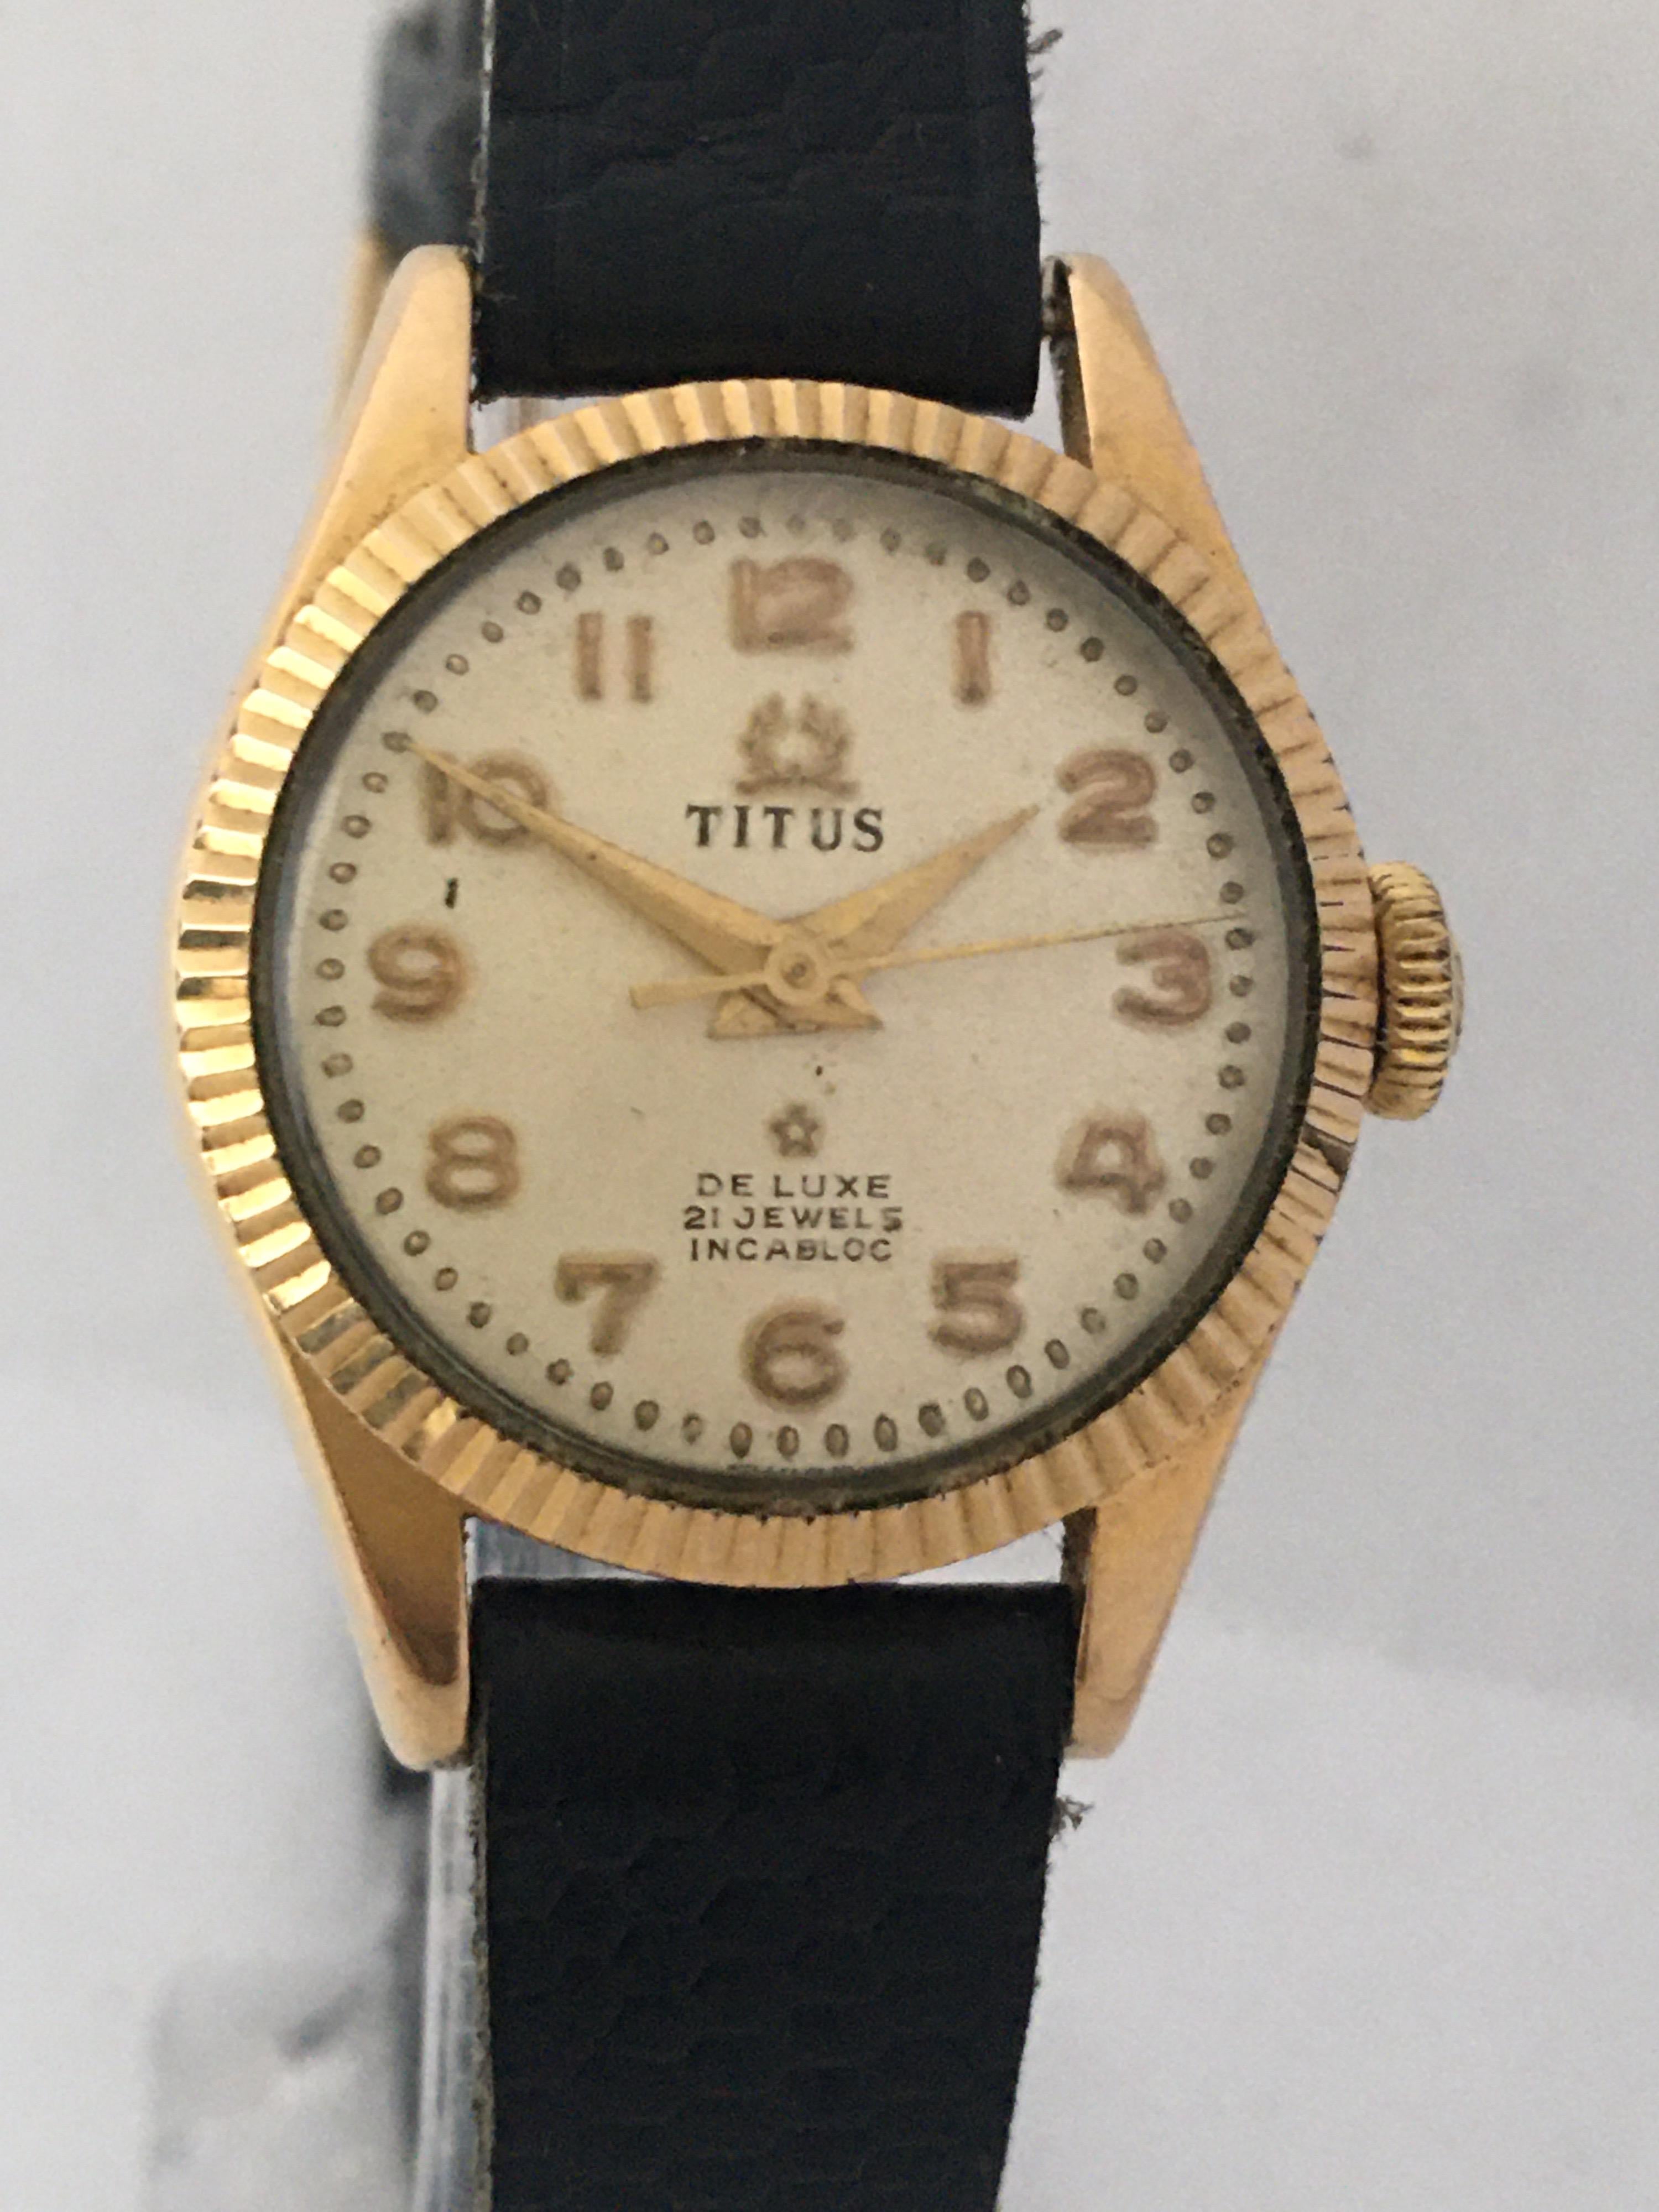 This beautiful 23mm watch diameter vintage hand winding Watch is in good working condition and it is ticking and running well. Visible signs of ageing and wear with light and tiny scratches on the watch case as shown.

Please study the images